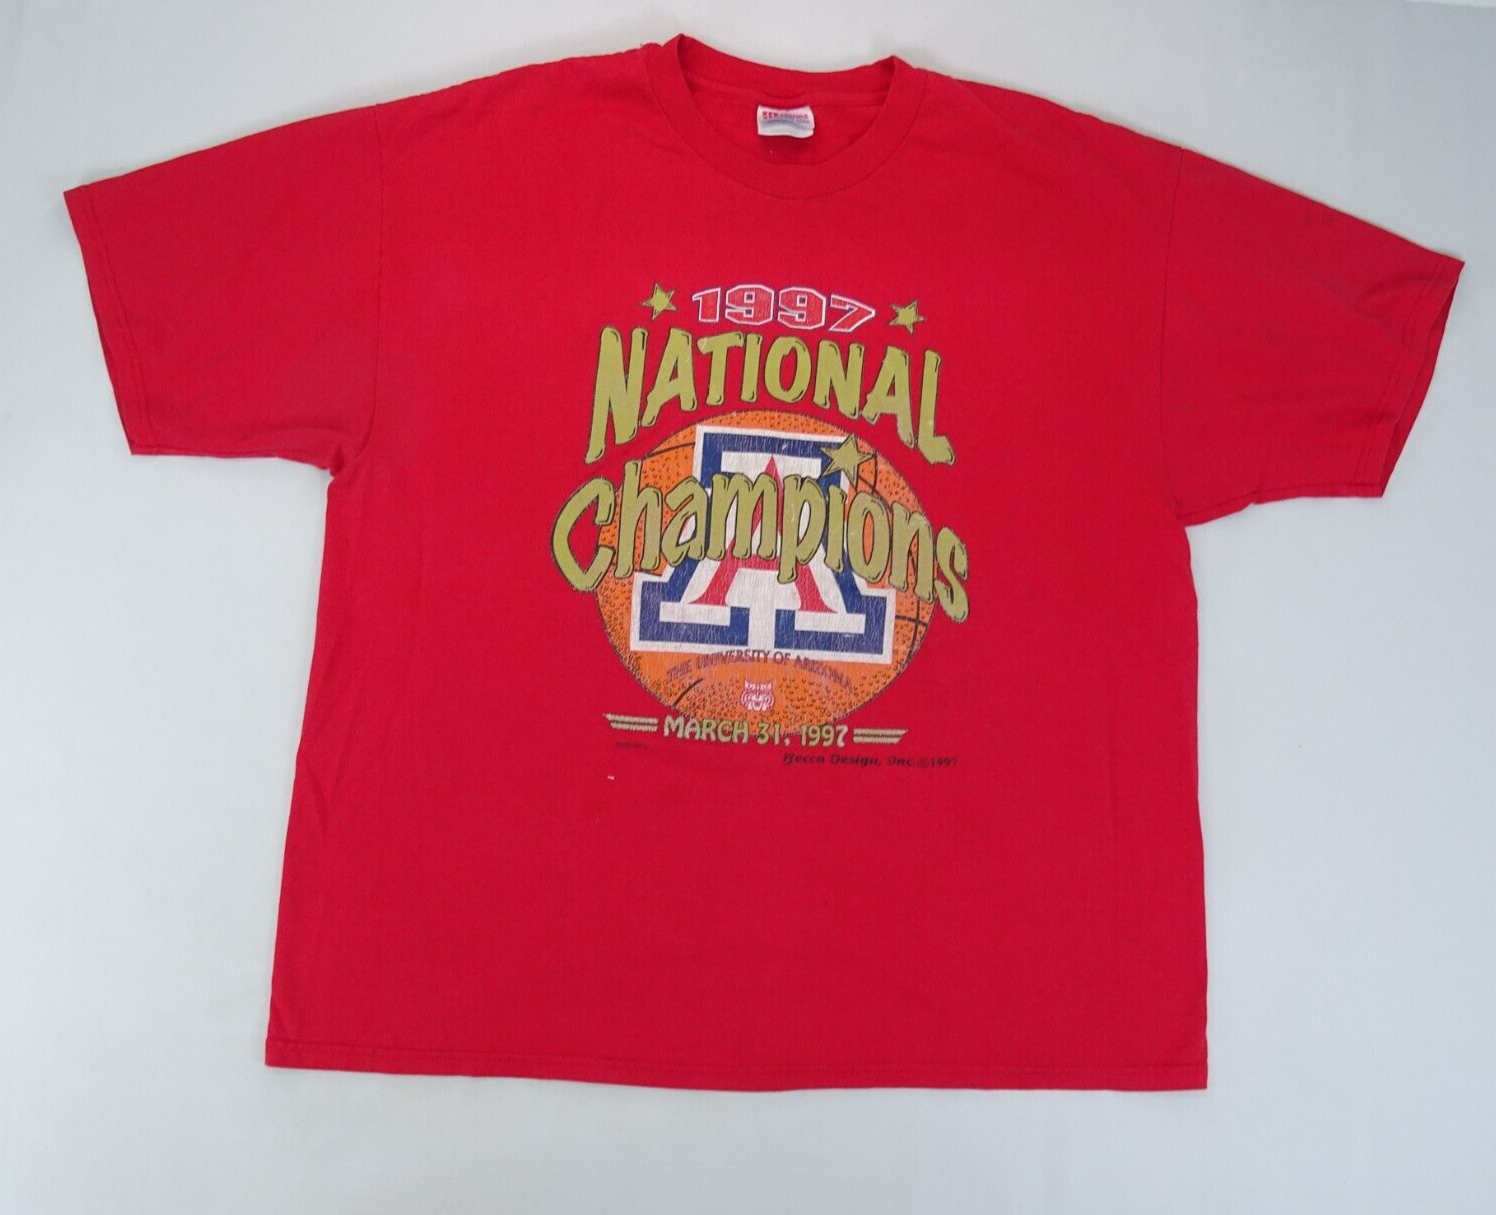 Primary image for Vintage Arizona Wildcats Shirt Mens Large Red National Champions 1997 Pro Player